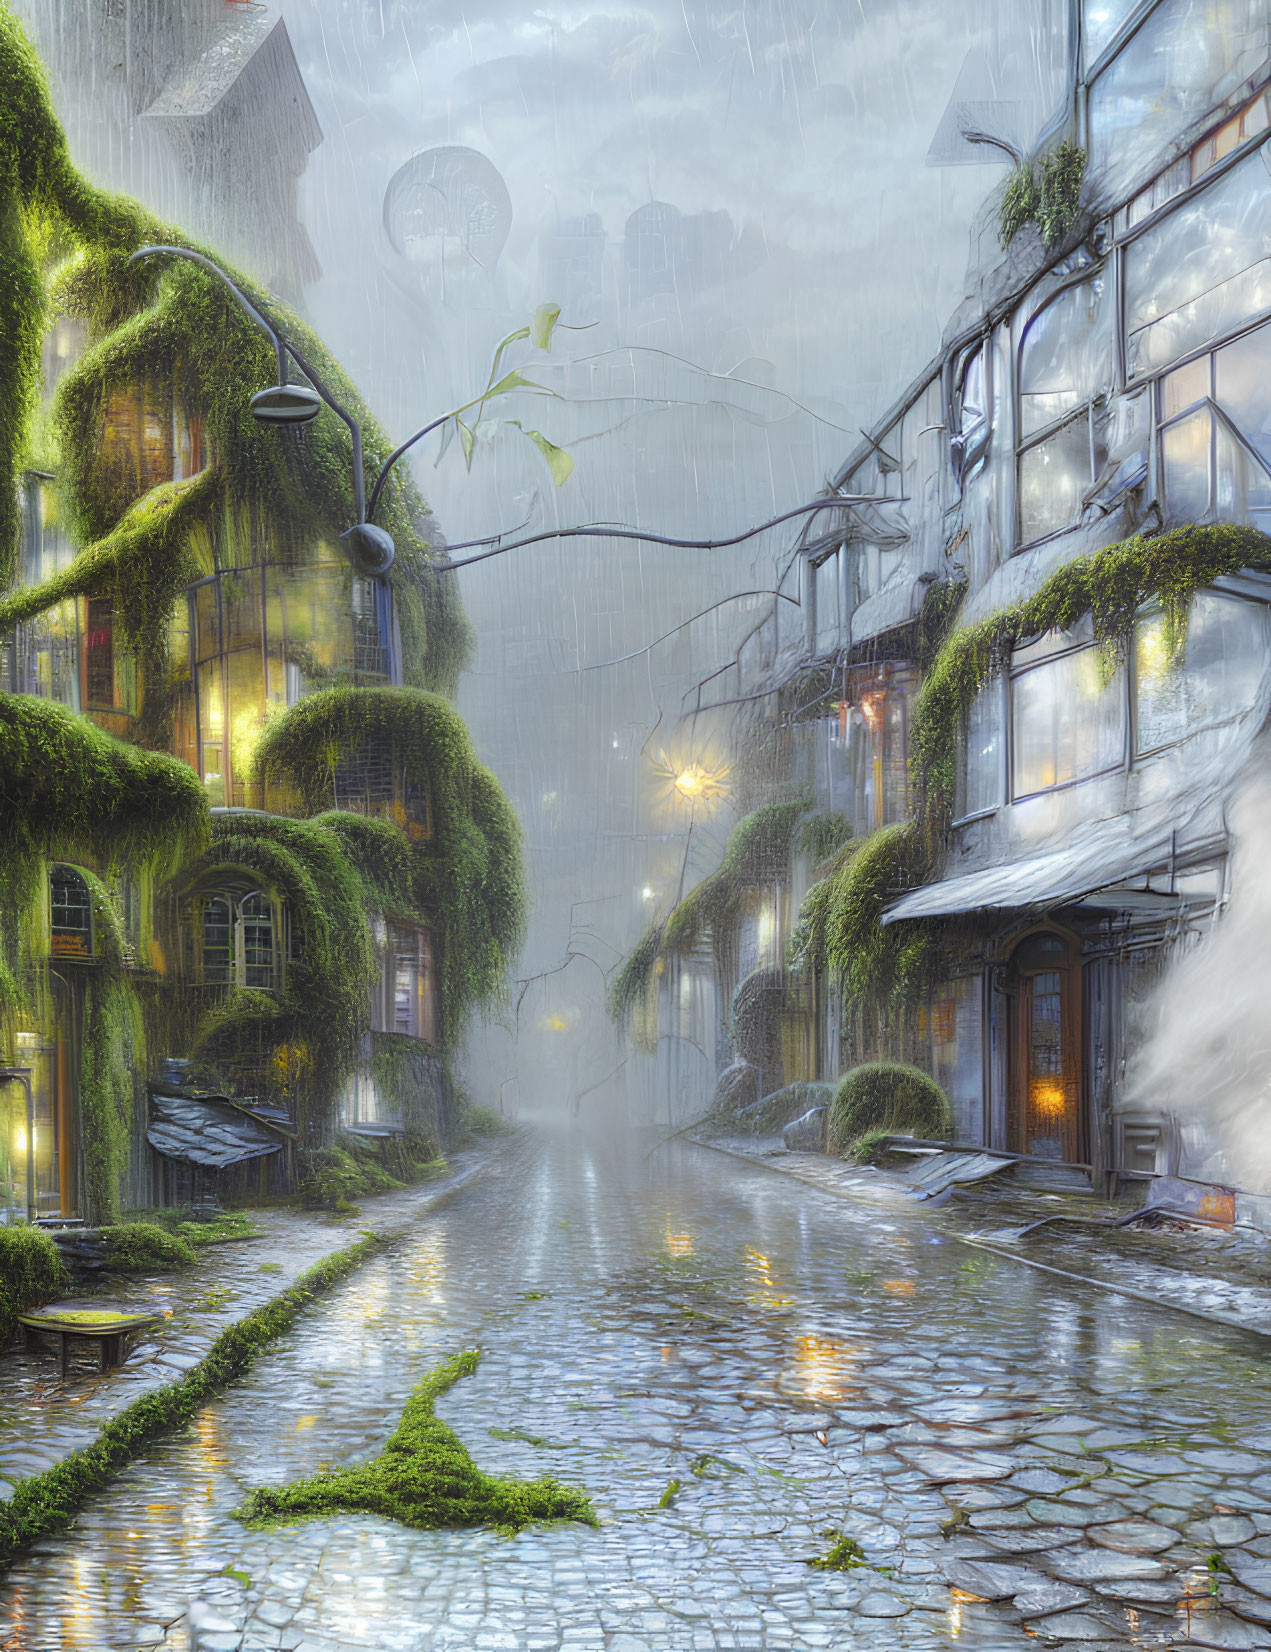 Cobblestone street with lush greenery and glowing lights in rainy cityscape